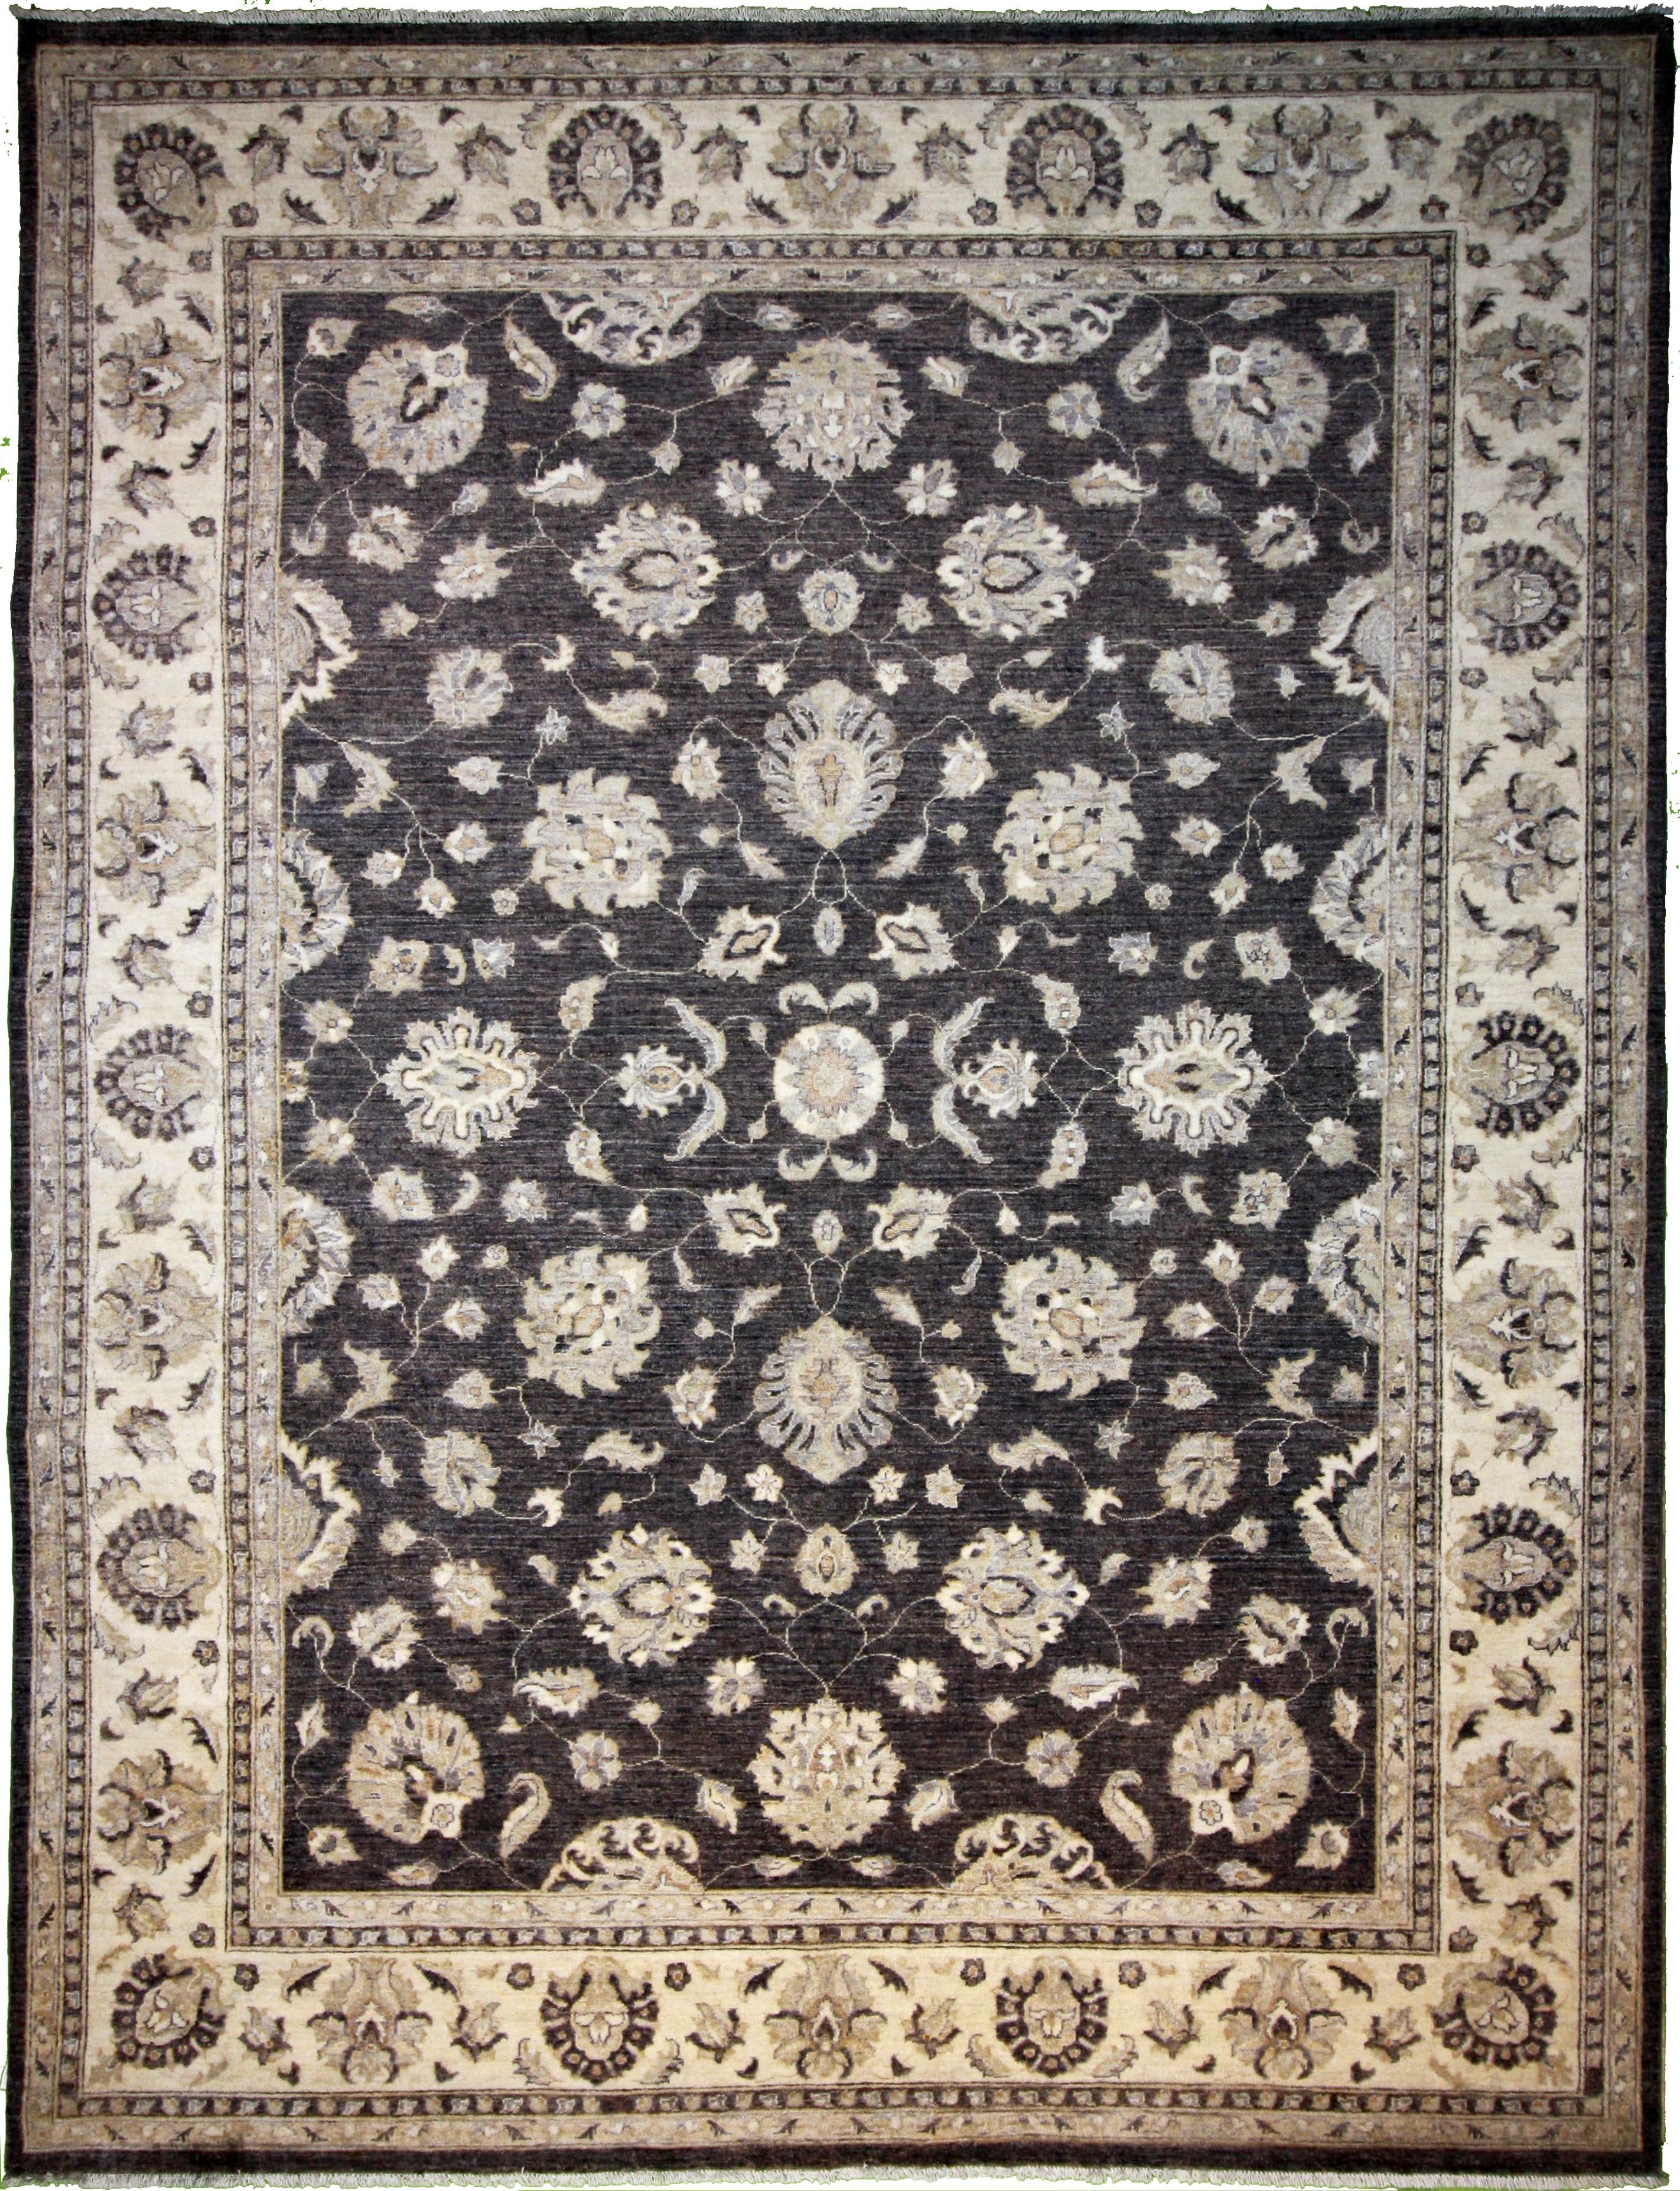 Hand Knotted Wool Gray Traditional Pakistan Rug 9' x 11'10"